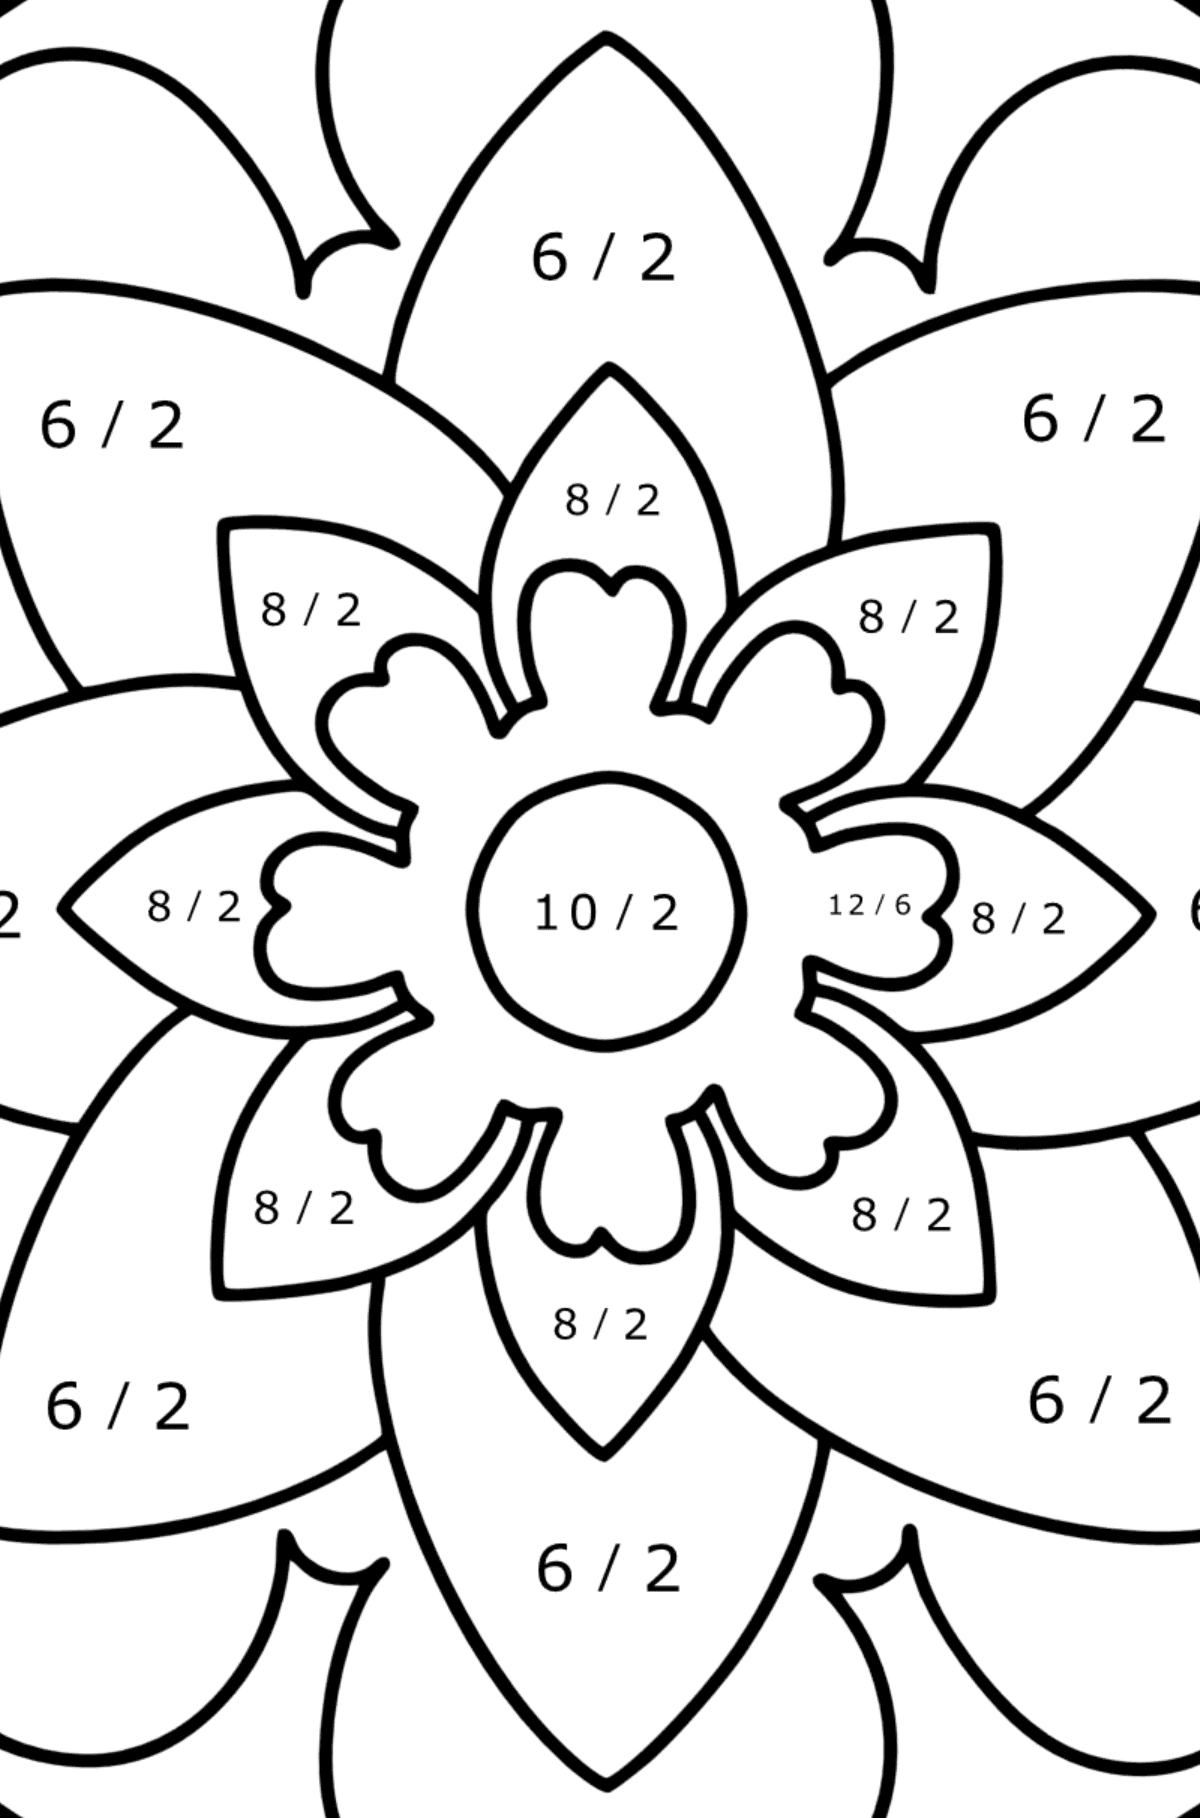 Mandala coloring page - 20 elements - Math Coloring - Division for Kids